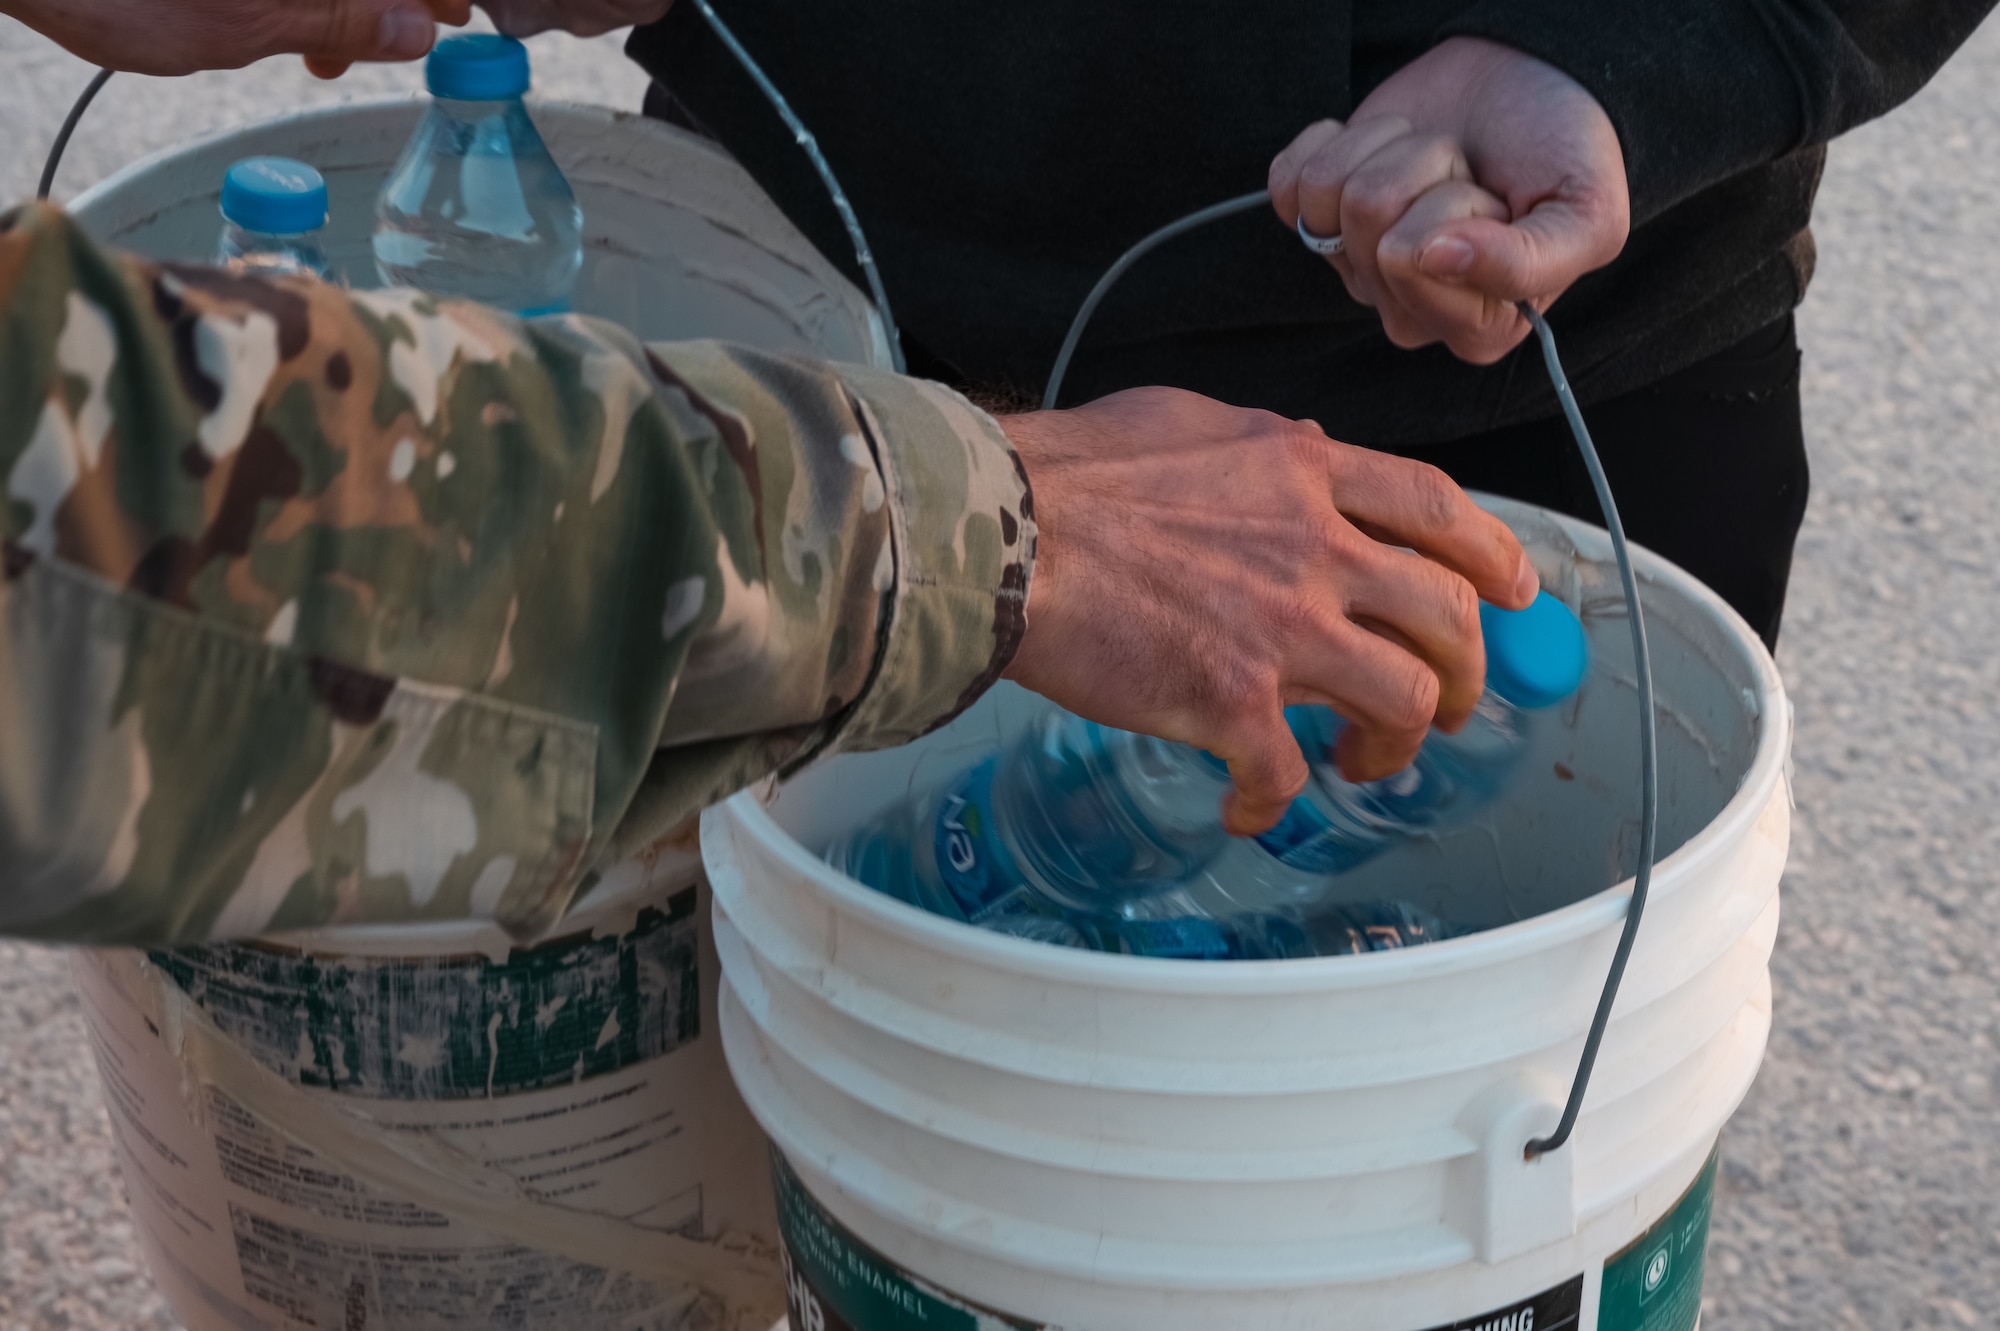 An Airman from the 332d Air Expeditionary Wing fills buckets during the “I Got Your Six” challenge at an undisclosed location, Nov. 19, 2022. The challenge substituted water bottles for stressors that Airman might face in a deployed setting and alerted them to the agencies that are there to assist during trying times. (U.S. Air Force photo by Tech. Sgt. Richard Mekkri)